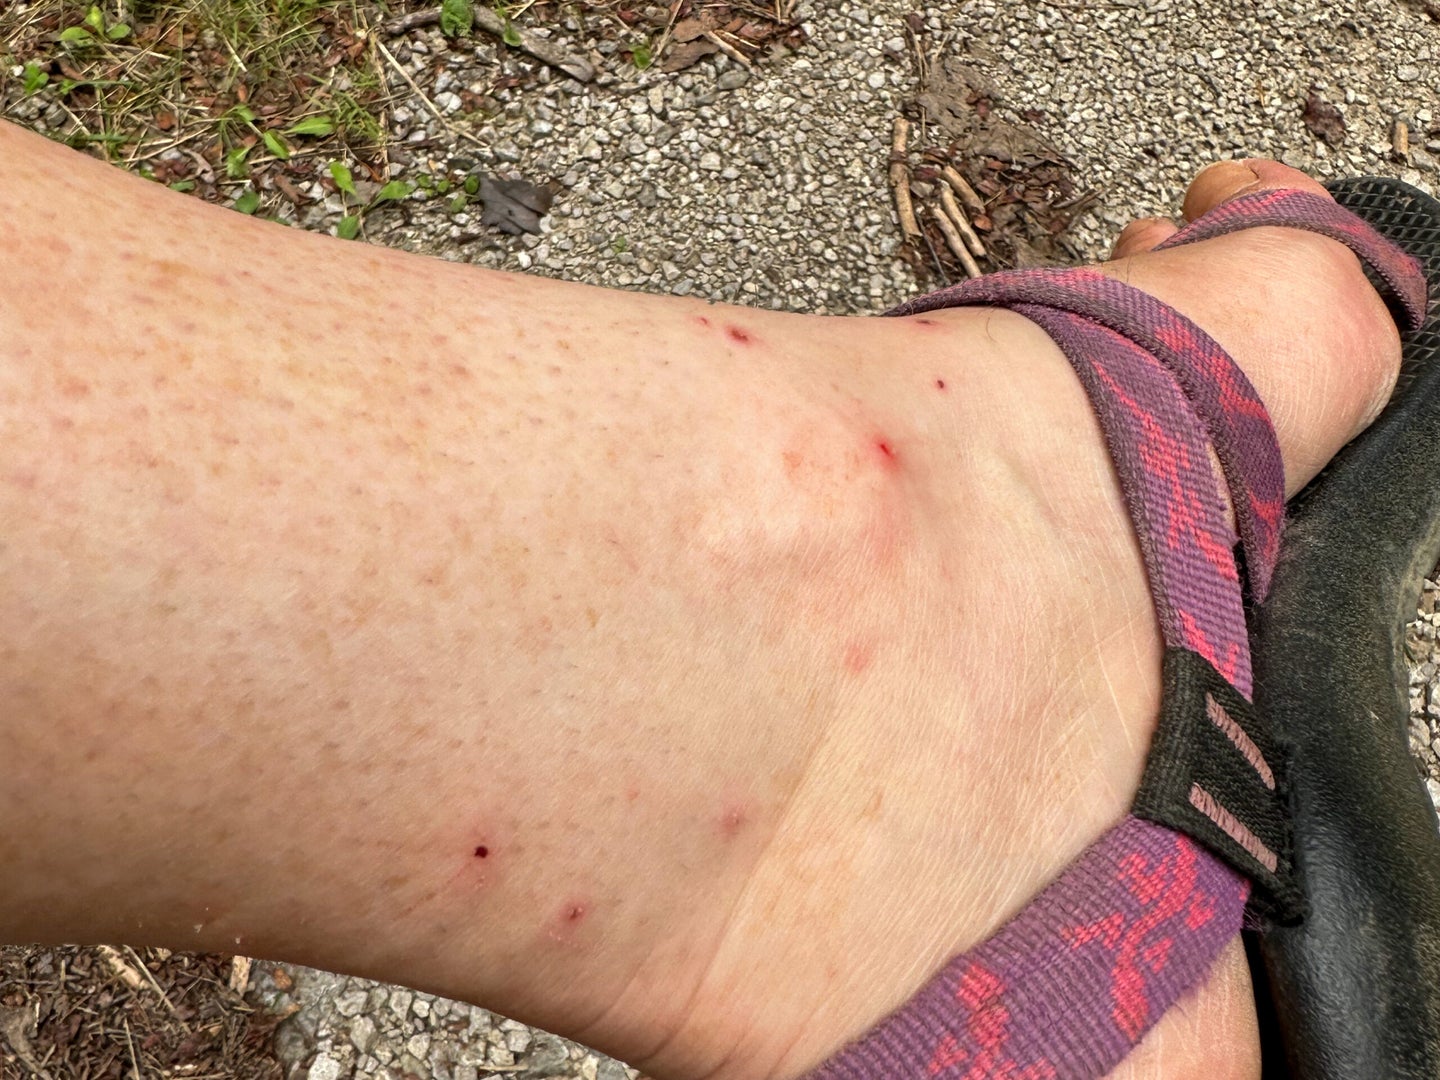 chigger bites on an ankle